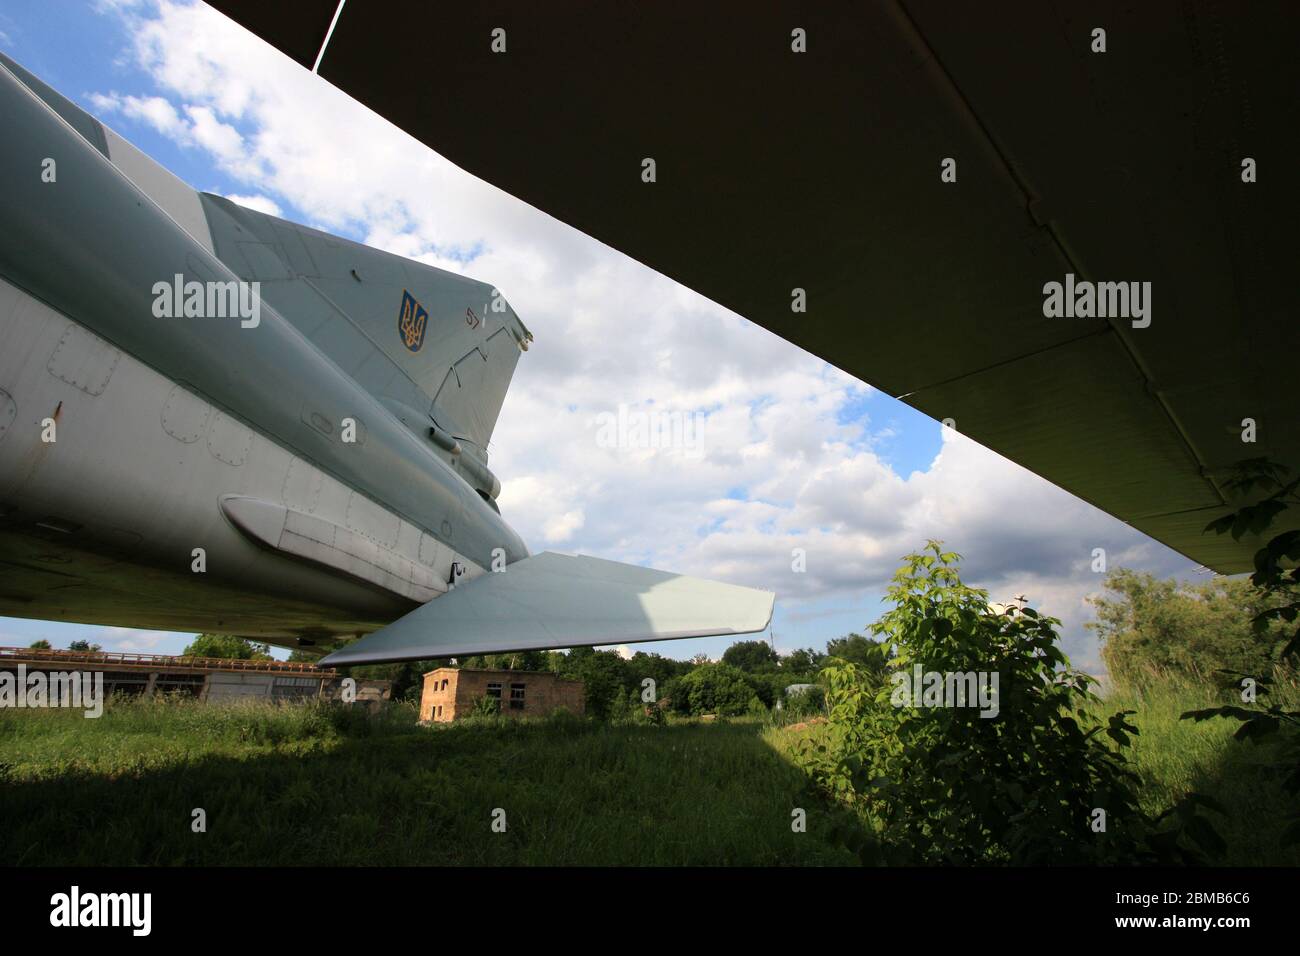 Exterior view of a Tupolev Tu-22M 'Backfire' supersonic long-range strategic and maritime strike bomber at the Zhulyany Ukraine State Aviation Museum Stock Photo